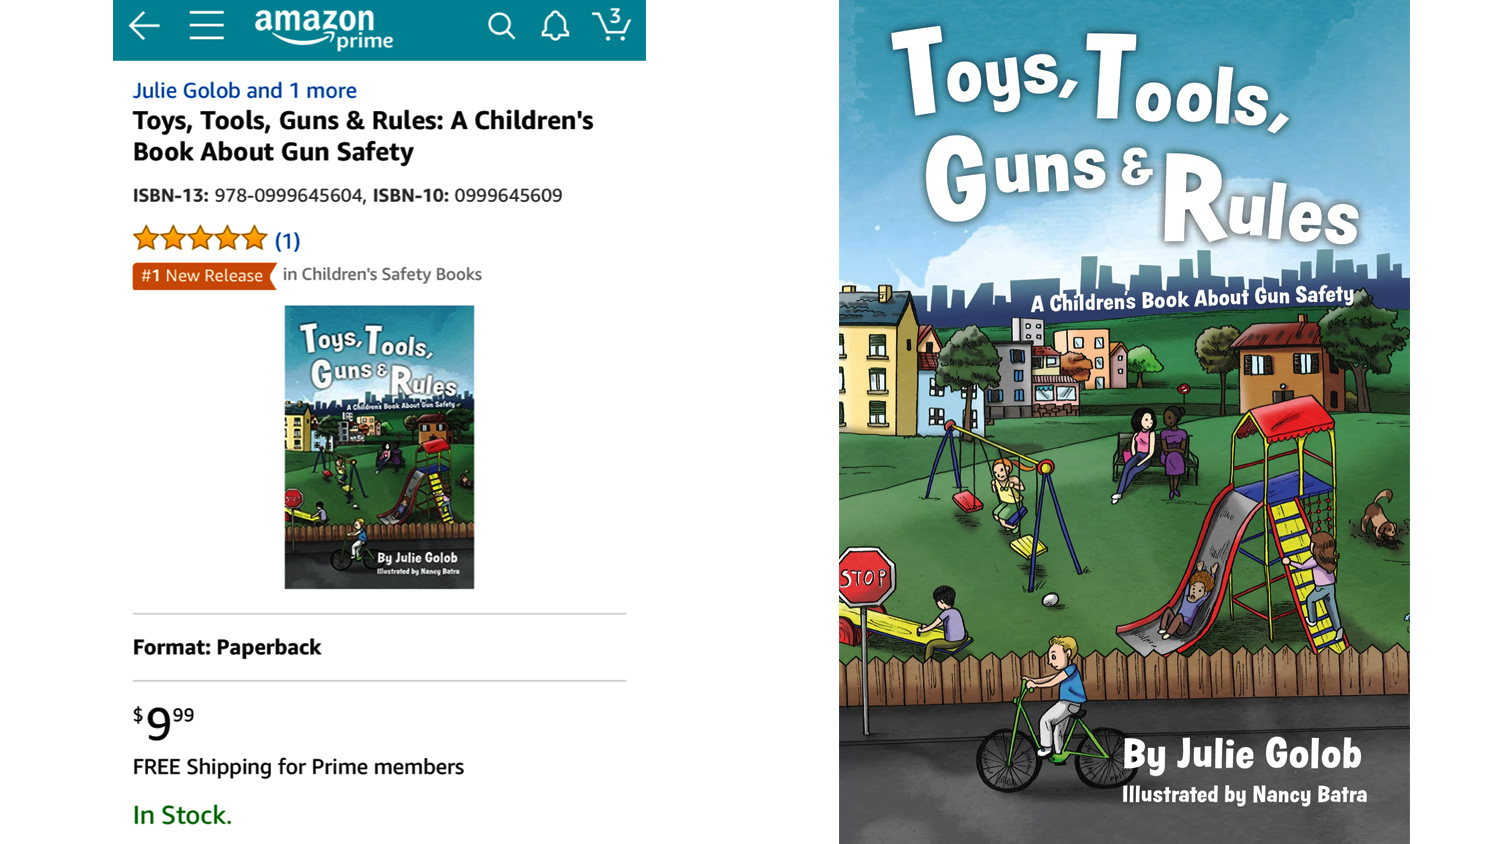 Toys, Tools, Guns &amp; Rules: A Children’s Book About Gun Safety is a hit on Amazon.com